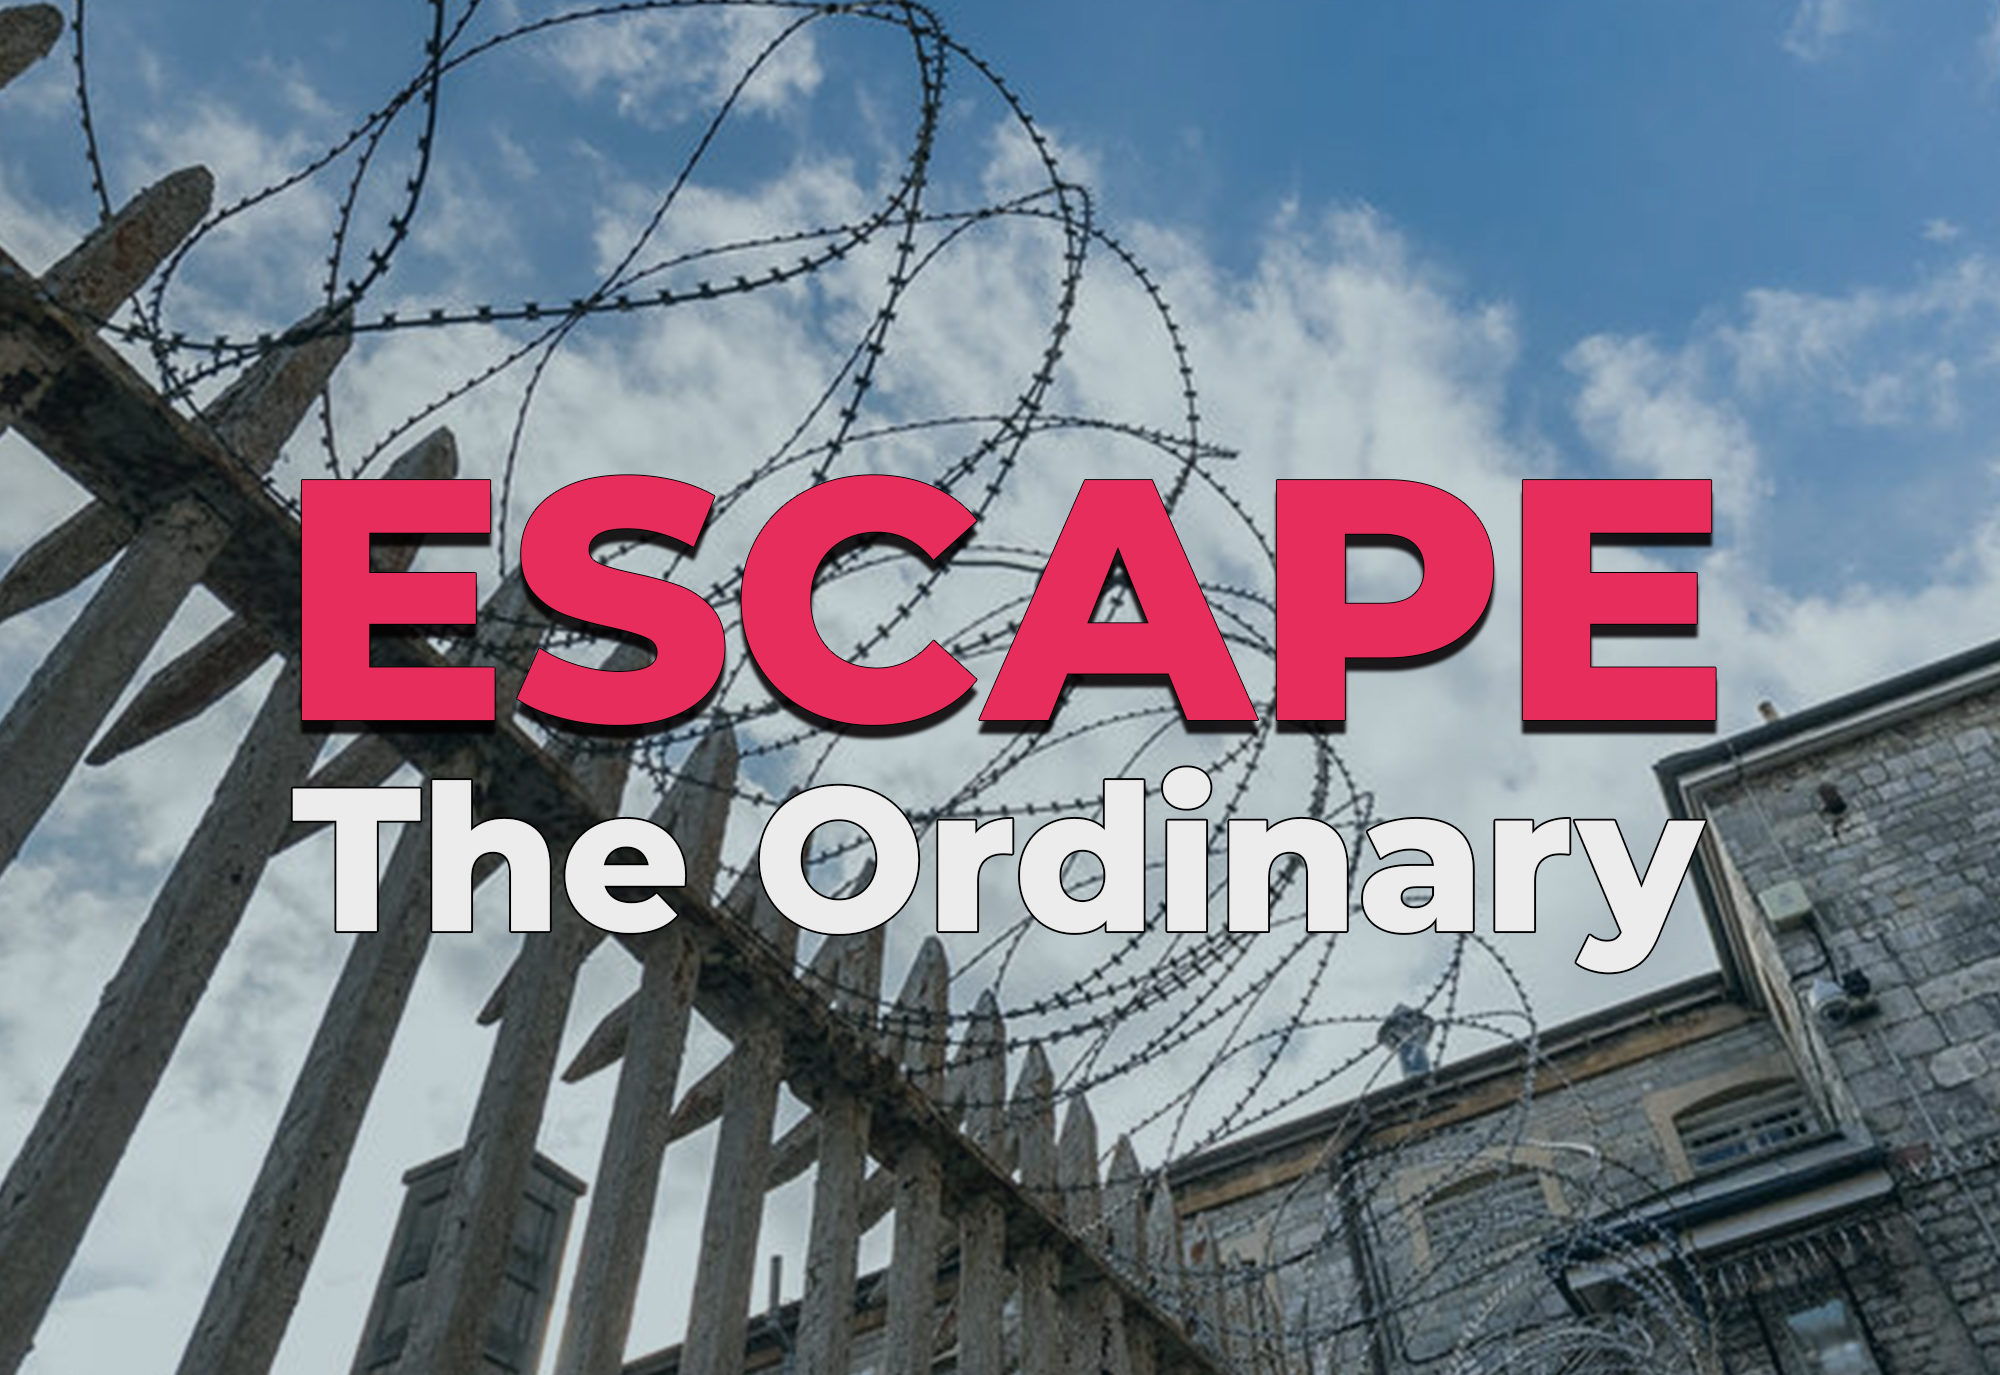 Visit The World’s Oldest Prison to ‘Escape The Ordinary’ This May Half Term